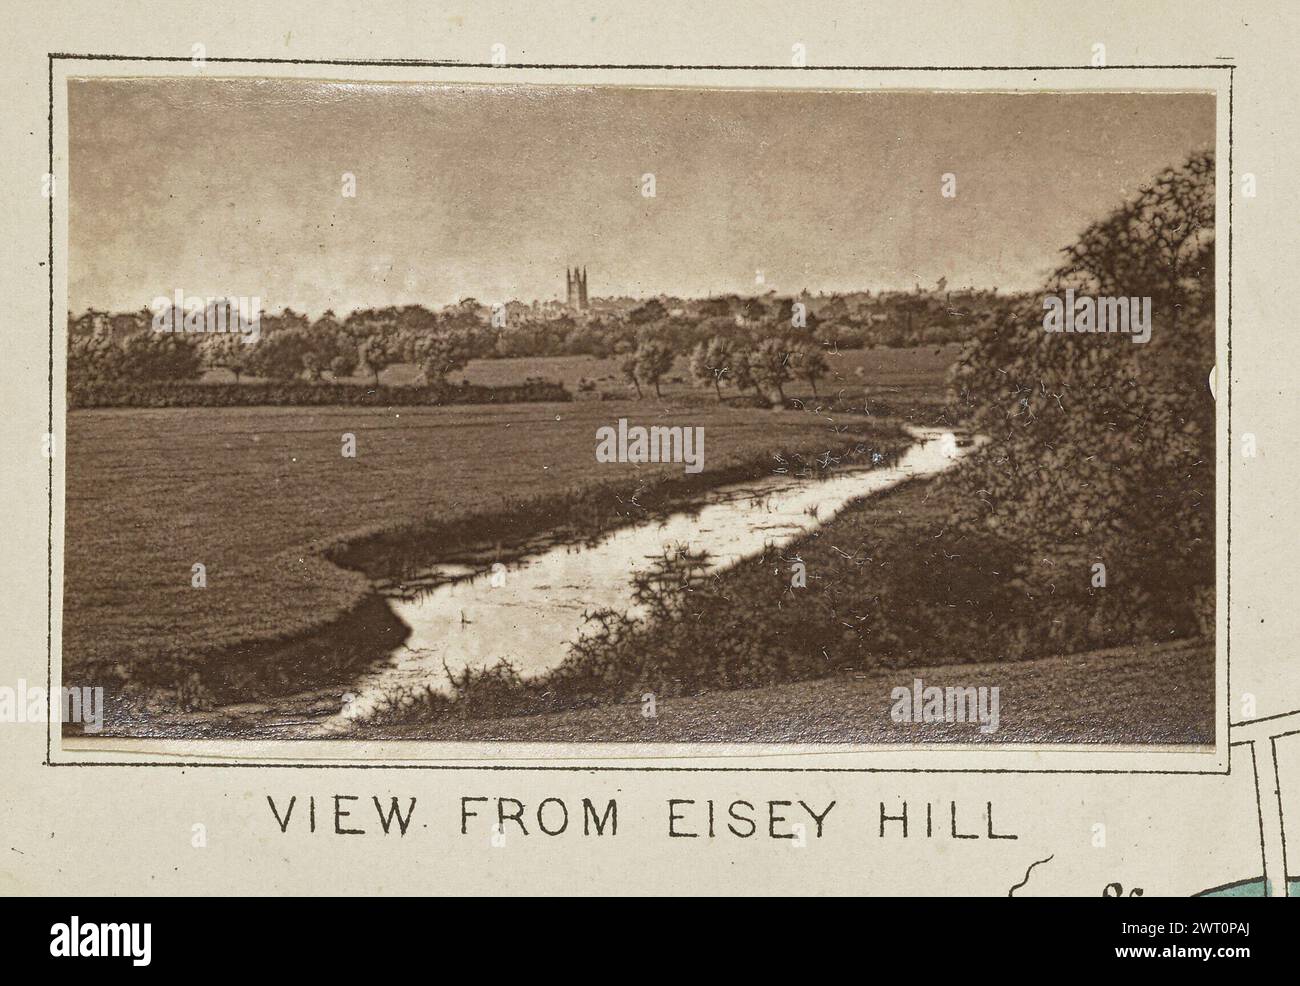 View from Eisey Hill. Henry W. Taunt, photographer (British, 1842 - 1922) about 1886 One of three tipped-in photographs illustrating a printed map of Castle Eaton, Kempsford, and the surrounding area along the River Thames. The photograph shows a view of the river cutting through a field near Cricklade, with a view of the tower from the Church of St. Sampson visible over the trees in the distance. (Recto, mount) lower center, below image, printed in black ink: 'VIEW FROM EISEY HILL' Stock Photo